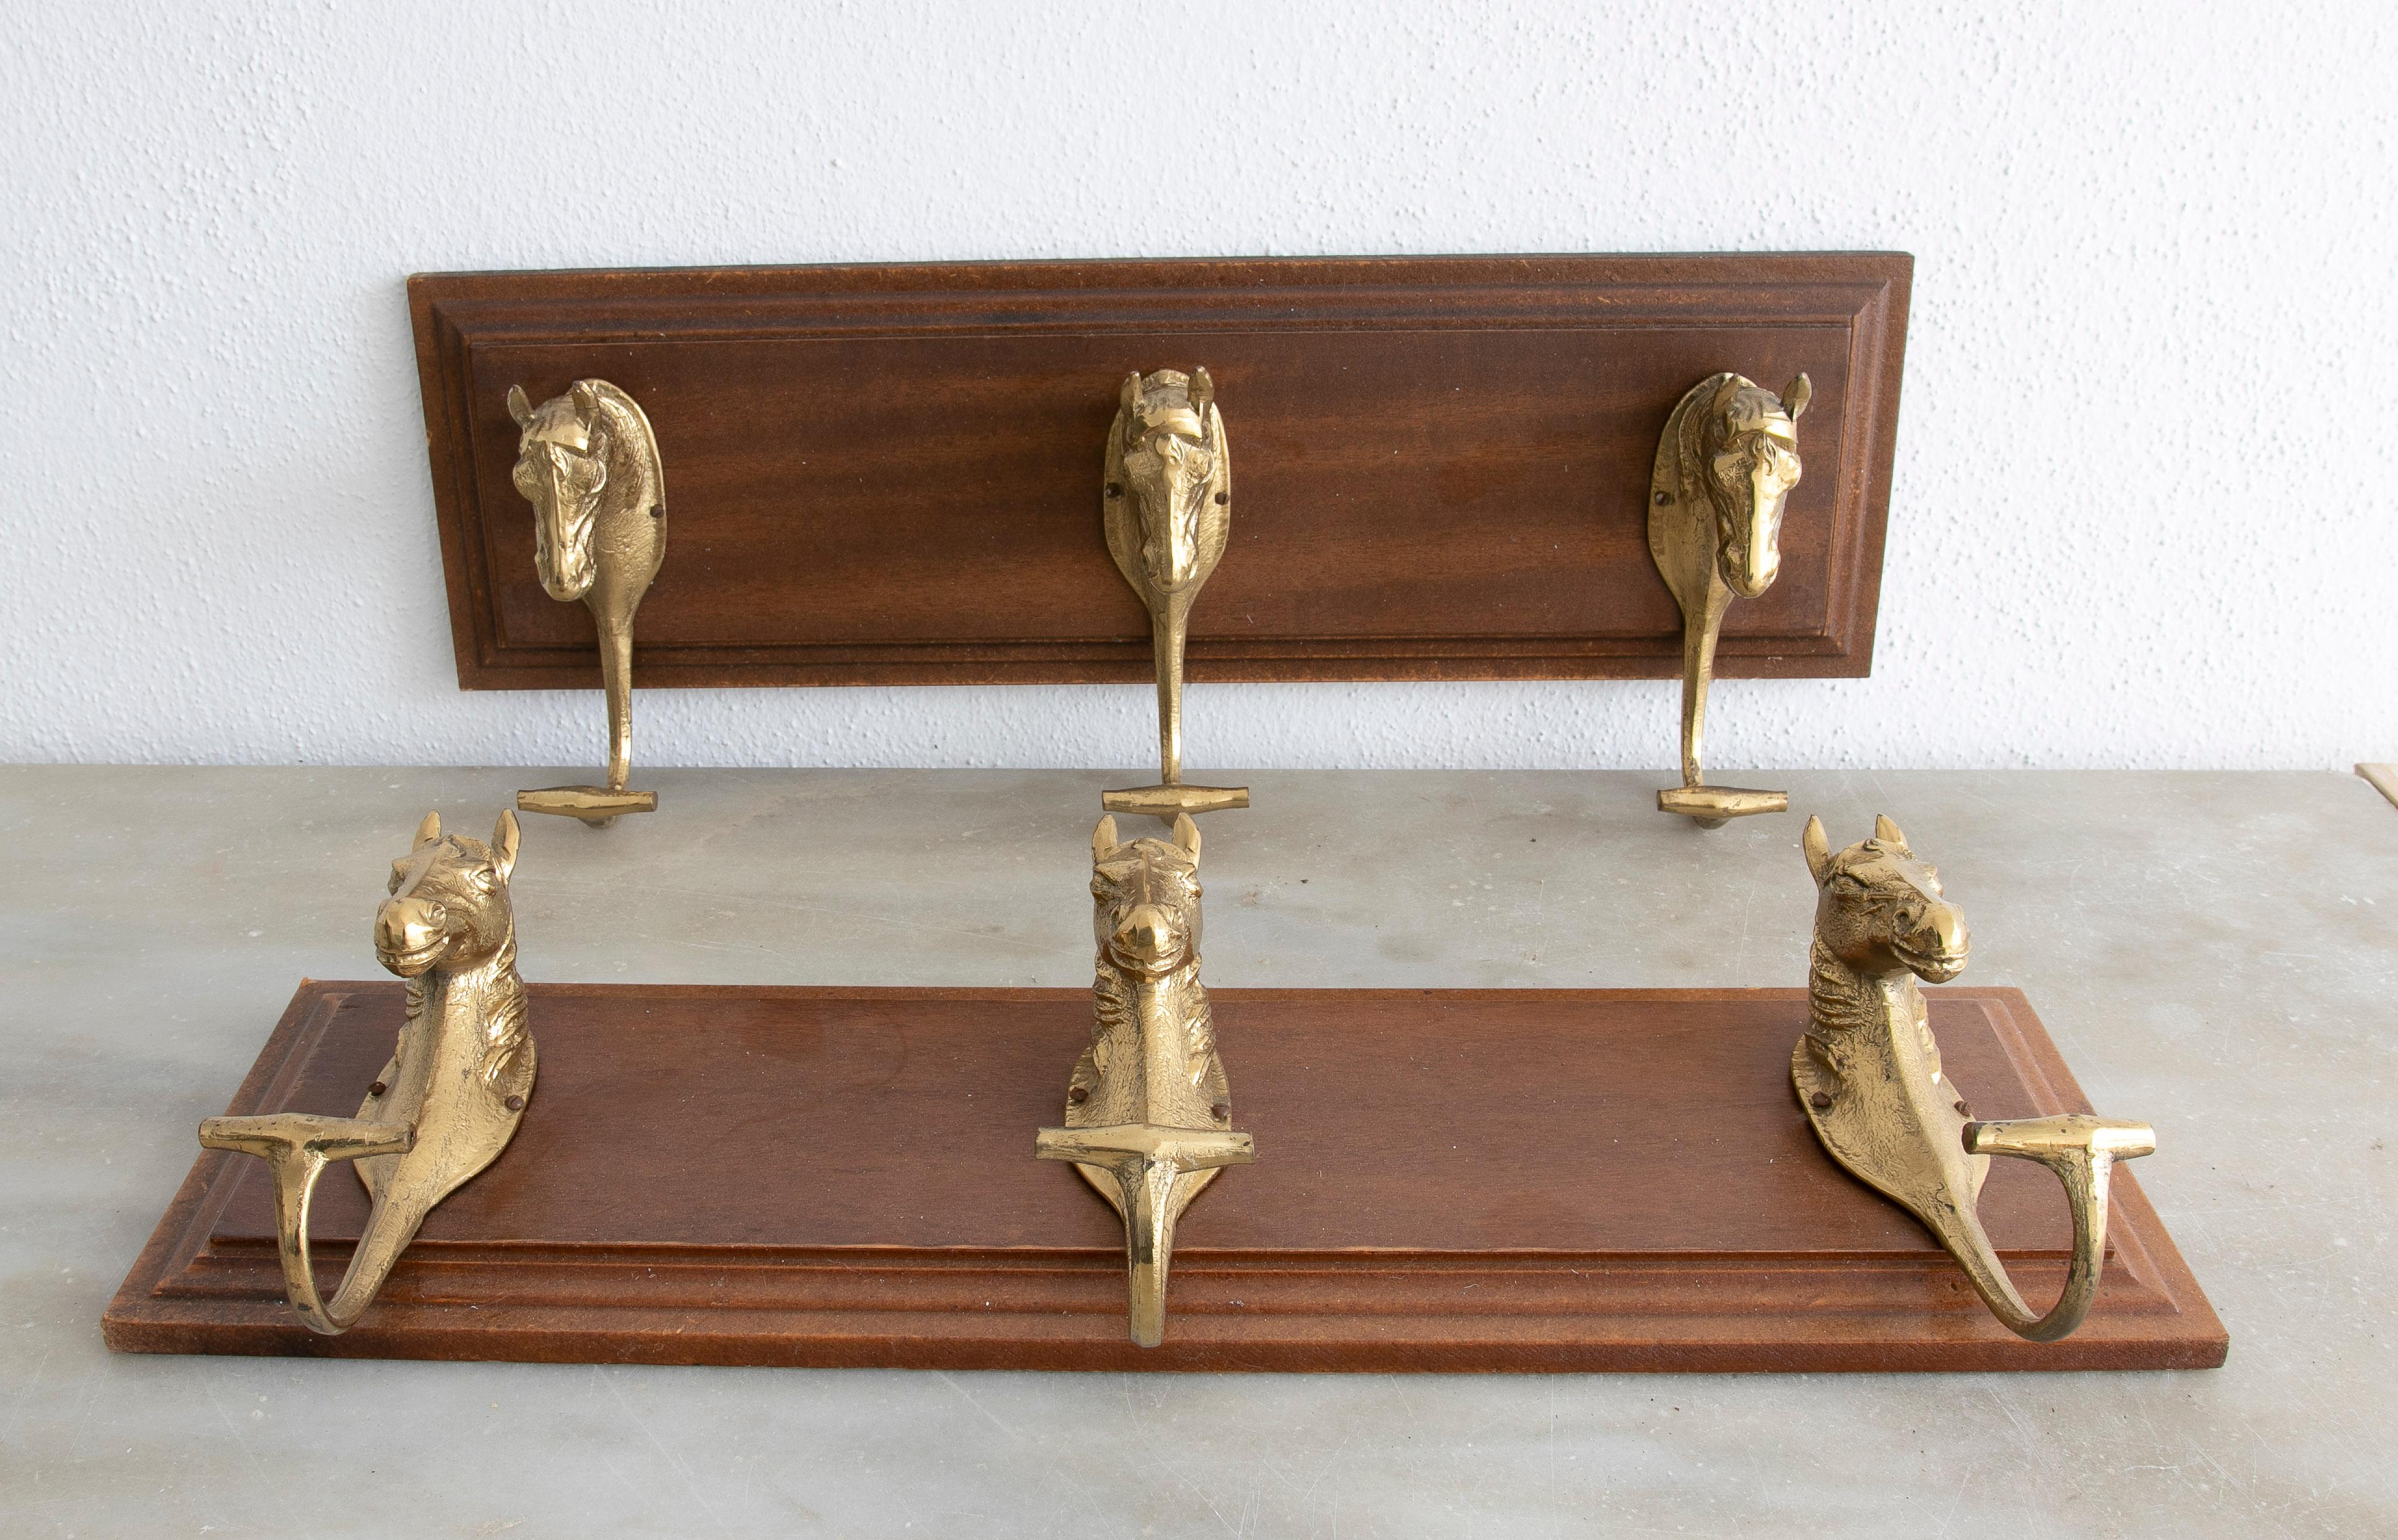 Pair of 1990s Spanish wood and bronze 3-hook coat hanger. Each hook has been cast a a horse figure head.